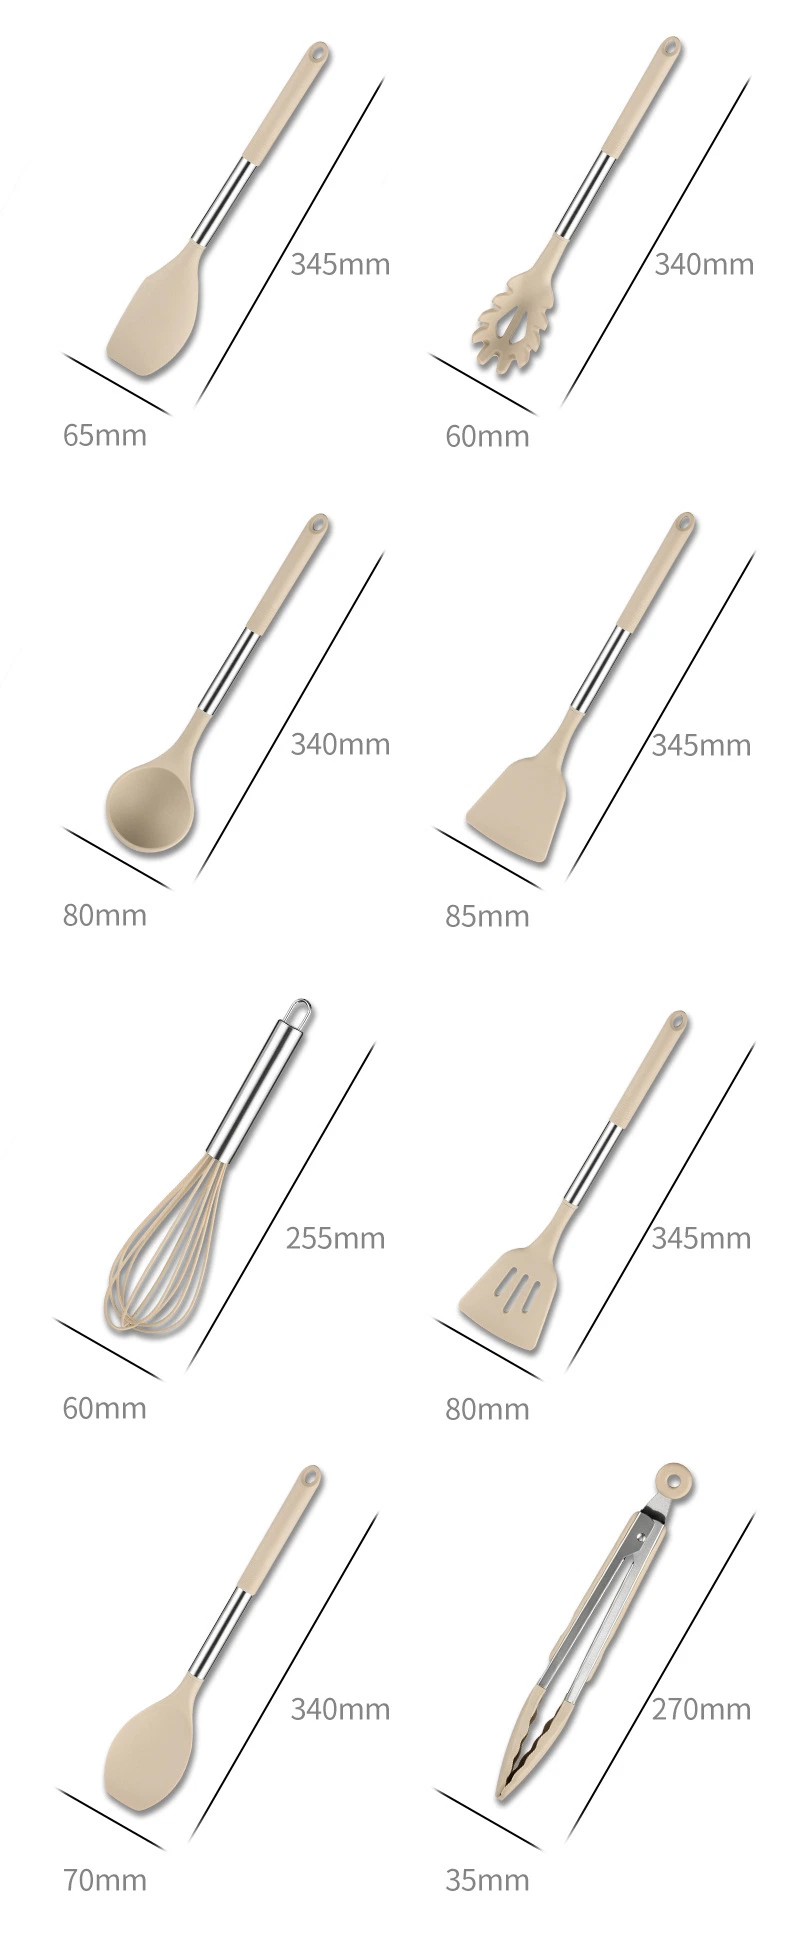 9PCS/11PCS Silicone Cooking Sets Stainless Steel Handle Kitchen Utensils Set